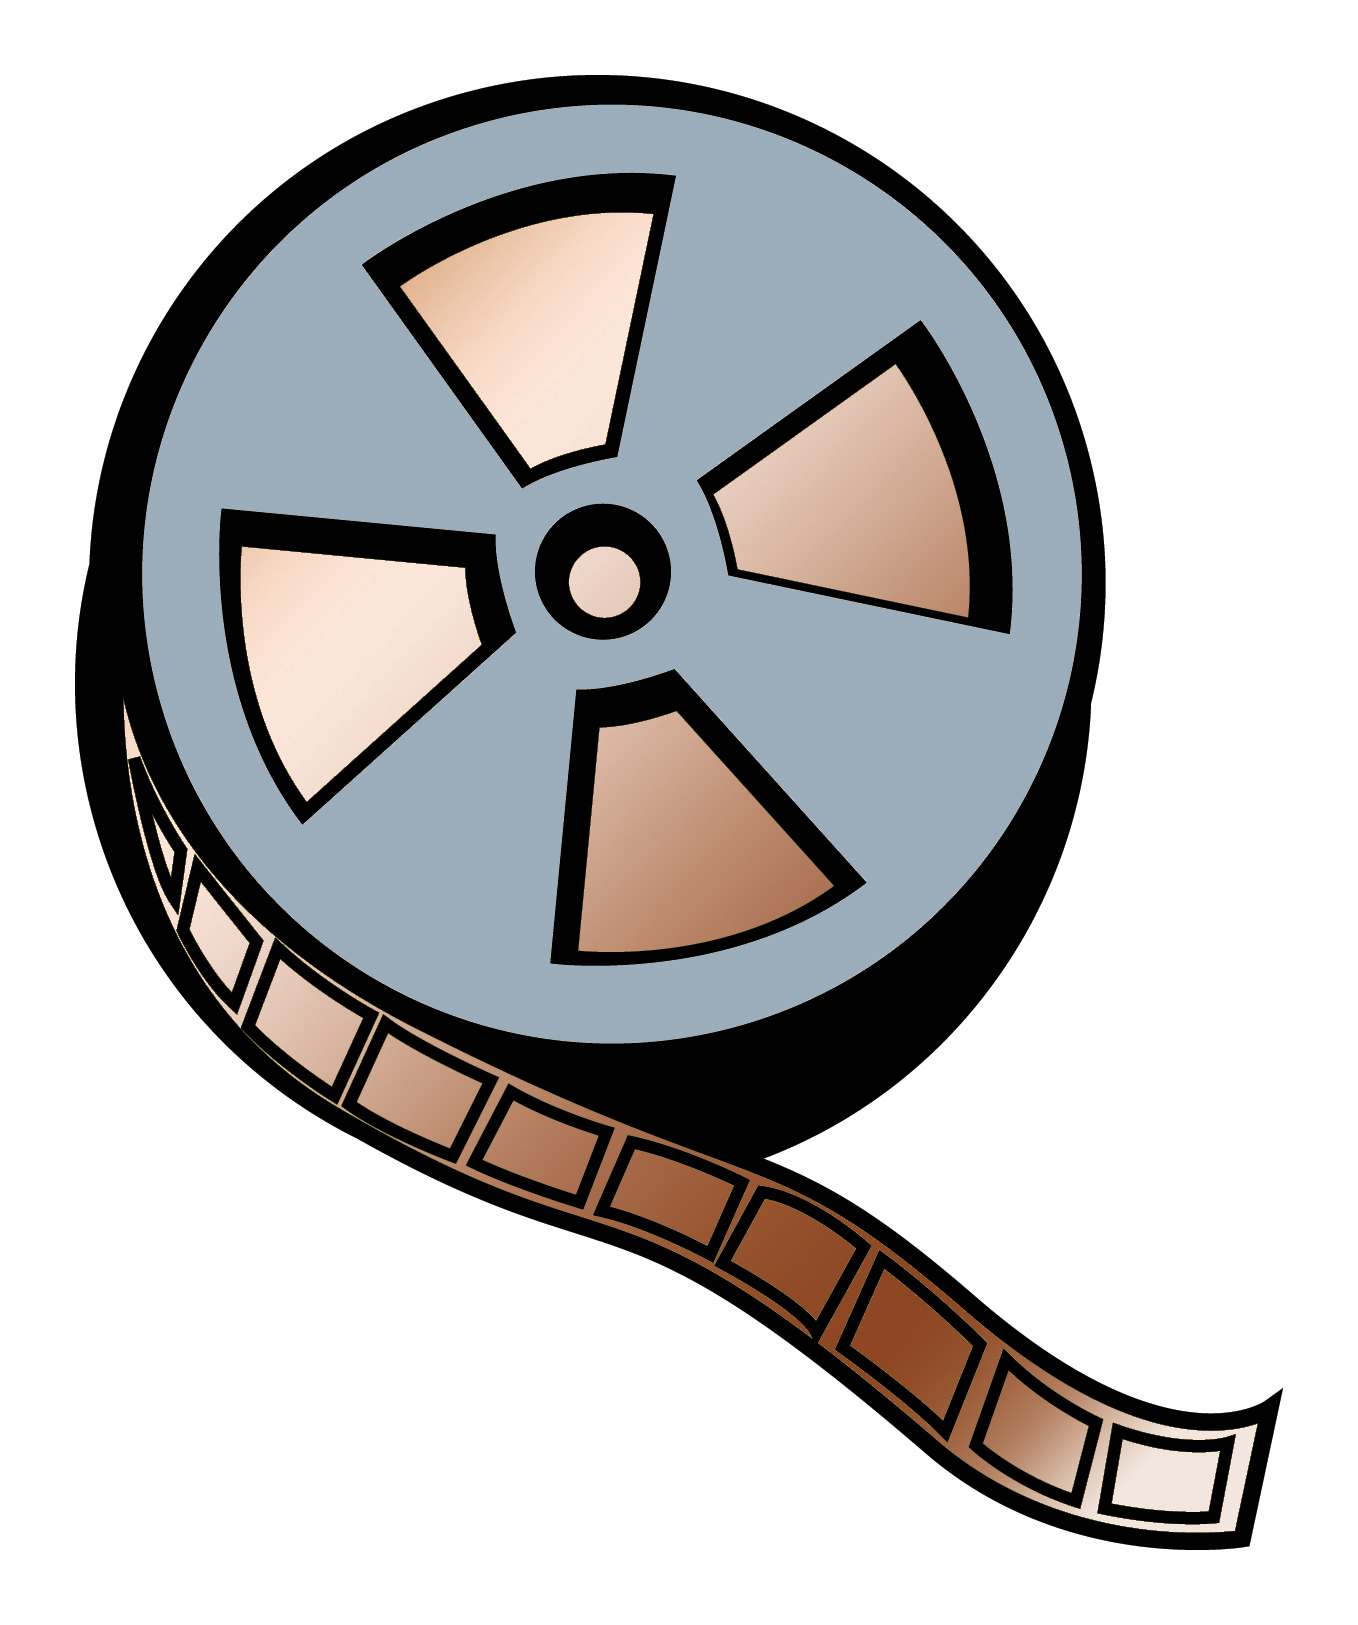 Movie Reel Clip Art - Clipart library